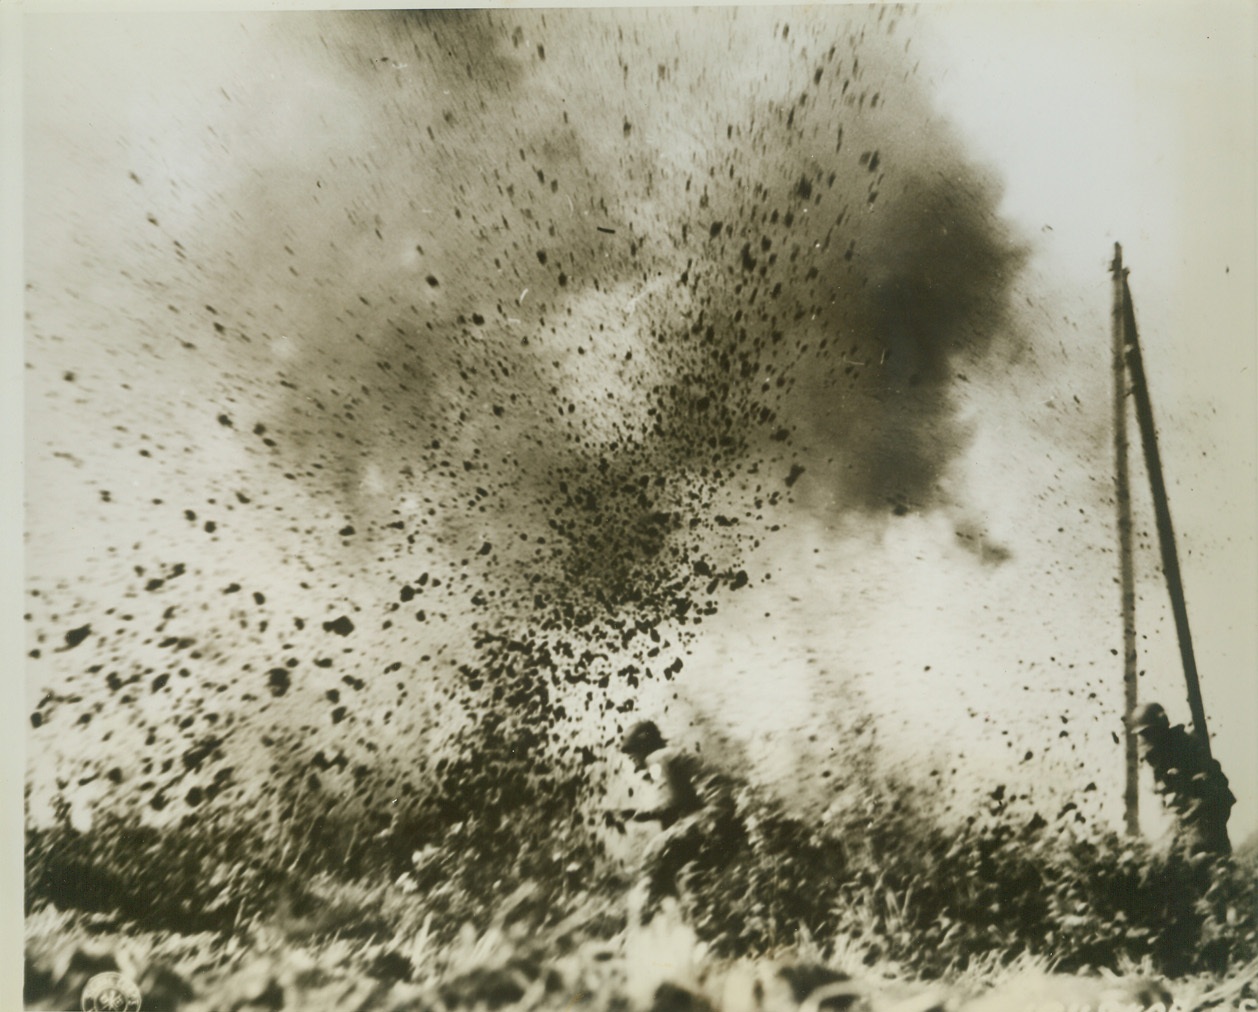 Yanks Barge Through Shell Burst, 10/13/1944. Holland – American paratroopers bend low but continue their advance on Arnhem as a bursting German 88 kicks up a section of field. Credit (Signal Corps Photo from ACME);